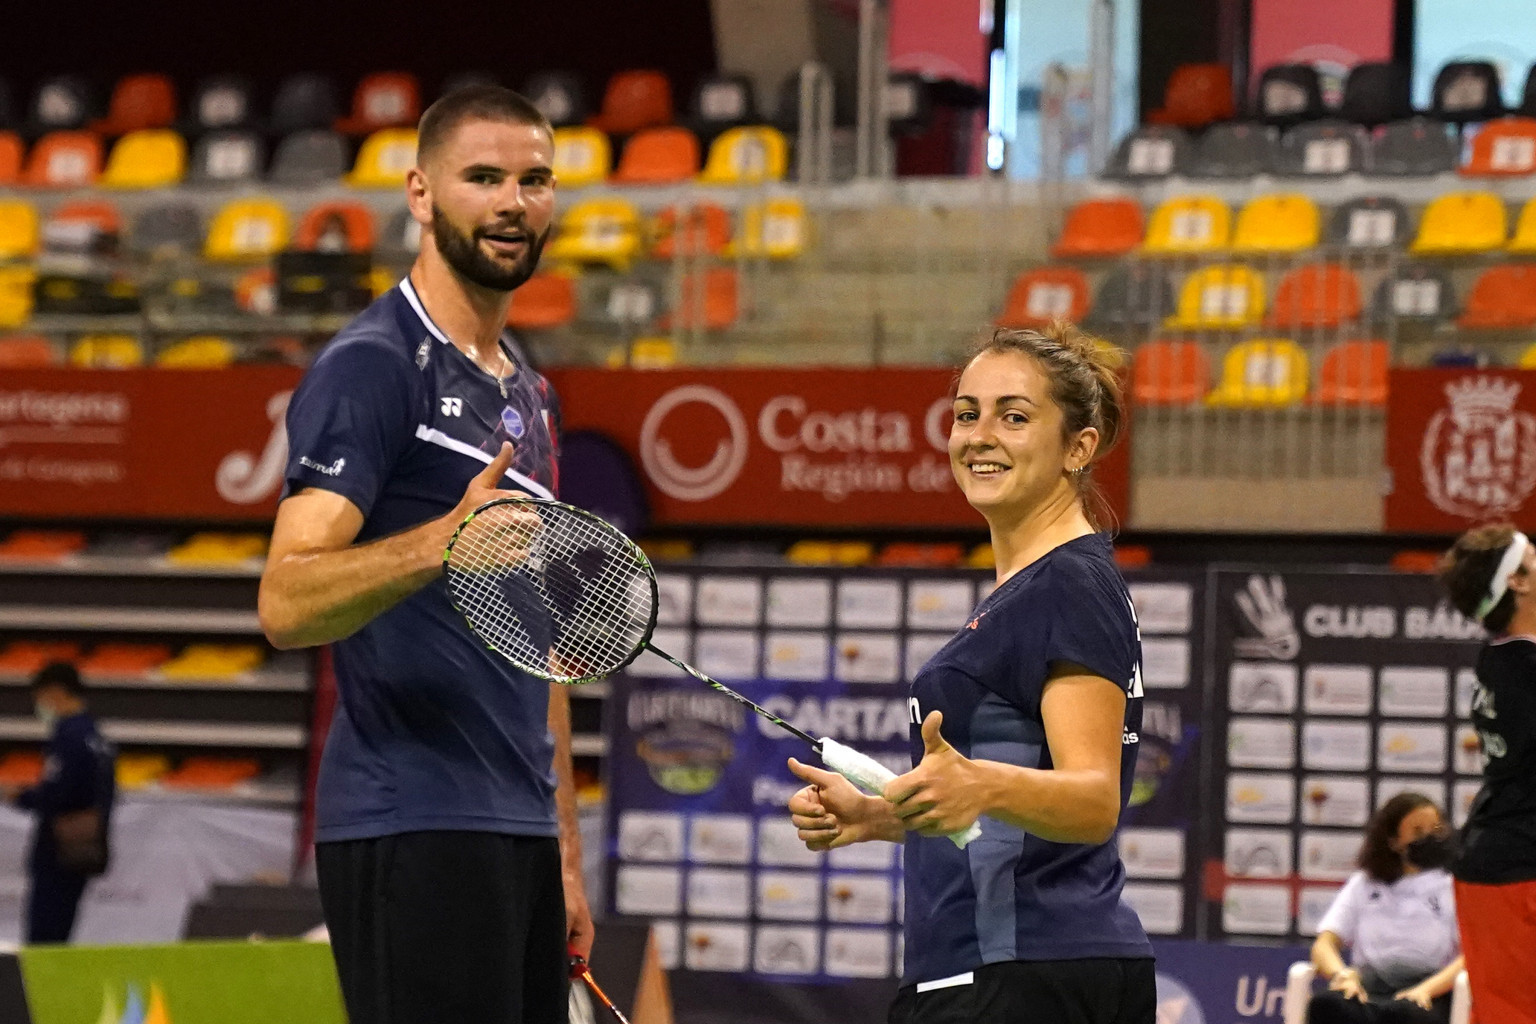 France's Lucas Mazur, left, pictured with Faustine Noel after winning the SL3-SU5 mixed doubles title, won three golds at the Spanish Para Badminton International ©Alan Spink/BWF